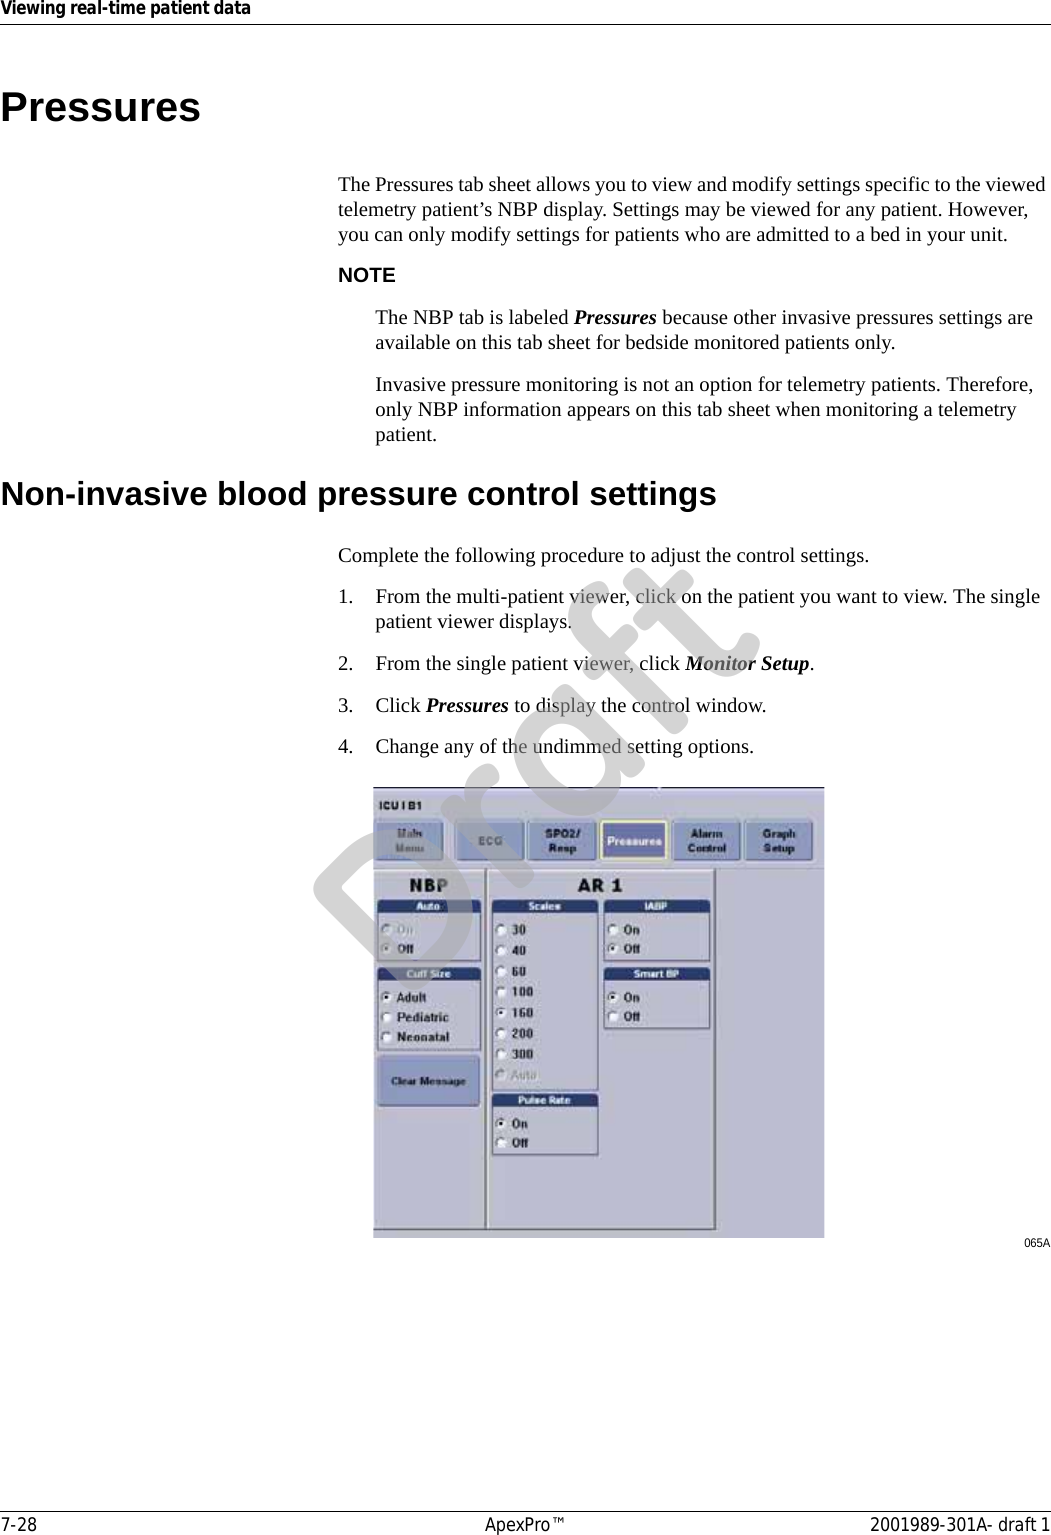 7-28 ApexPro™ 2001989-301A- draft 1Viewing real-time patient dataPressuresThe Pressures tab sheet allows you to view and modify settings specific to the viewed telemetry patient’s NBP display. Settings may be viewed for any patient. However, you can only modify settings for patients who are admitted to a bed in your unit.NOTEThe NBP tab is labeled Pressures because other invasive pressures settings are available on this tab sheet for bedside monitored patients only.Invasive pressure monitoring is not an option for telemetry patients. Therefore, only NBP information appears on this tab sheet when monitoring a telemetry patient.Non-invasive blood pressure control settingsComplete the following procedure to adjust the control settings.1. From the multi-patient viewer, click on the patient you want to view. The single patient viewer displays.2. From the single patient viewer, click Monitor Setup.3. Click Pressures to display the control window.4. Change any of the undimmed setting options.065ADraft